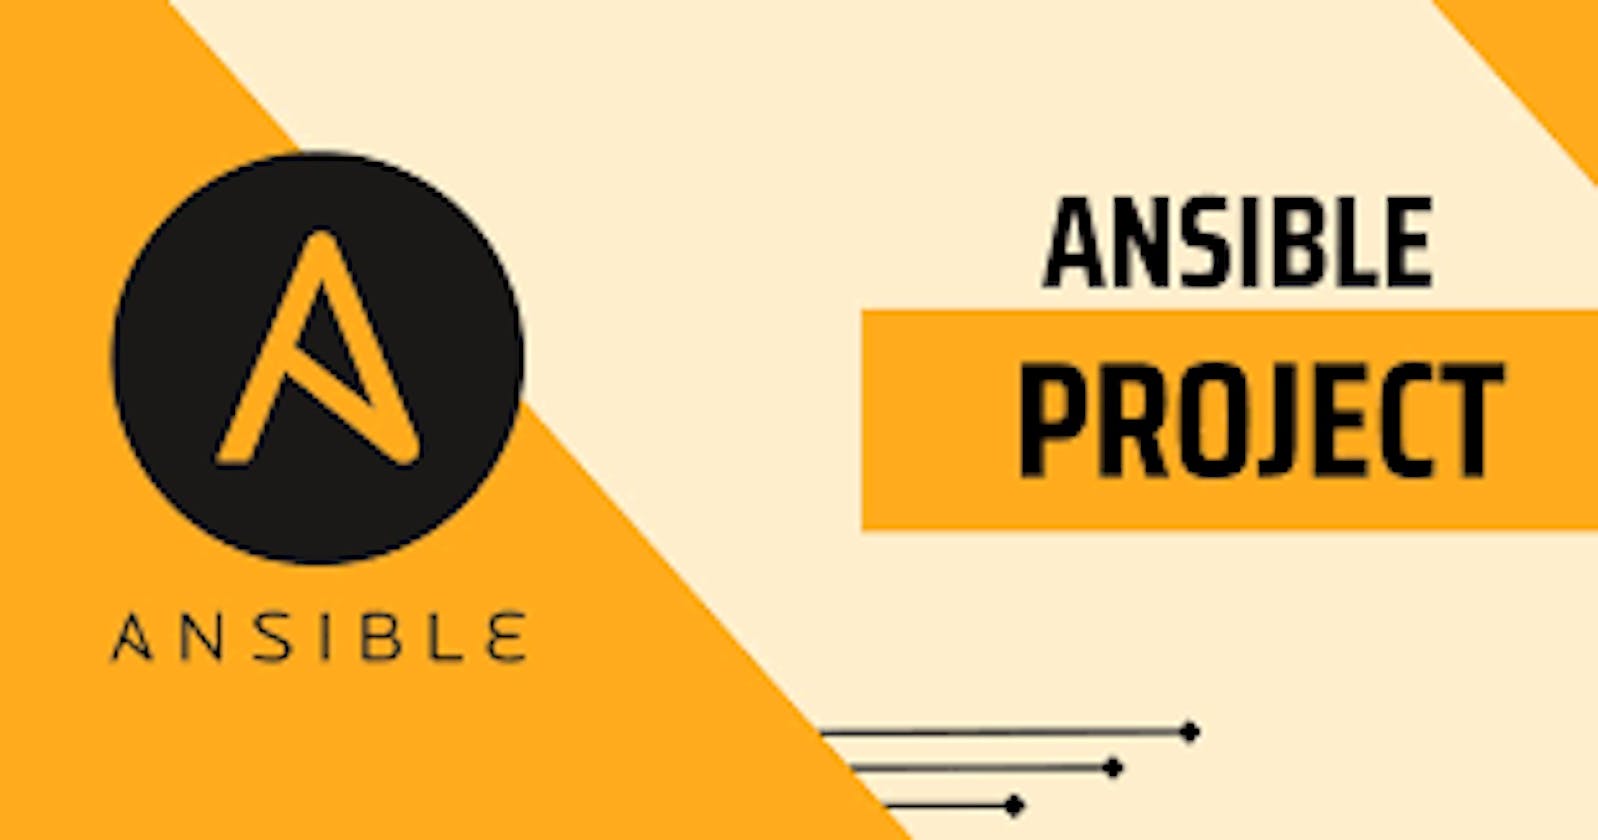 Day 59: Ansible Project🛠🚀